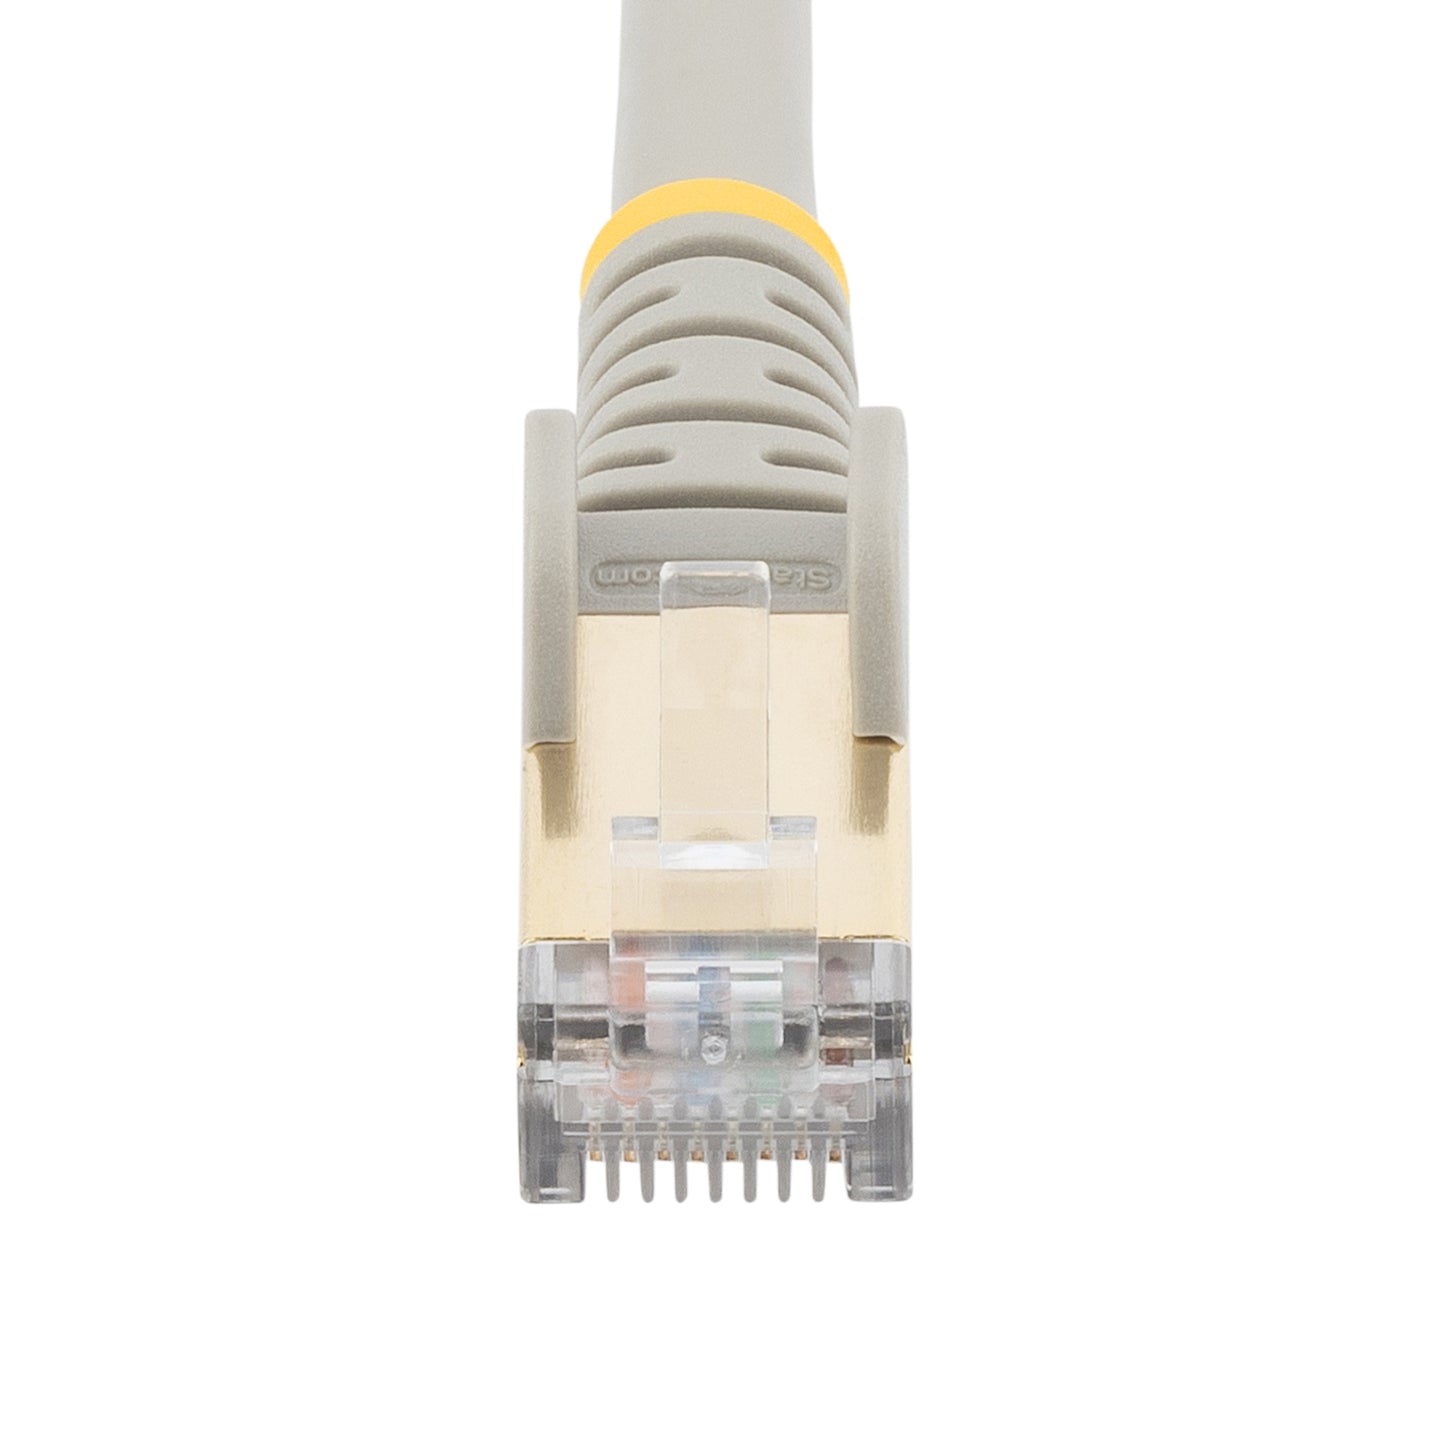 StarTech.com 3m CAT6a Ethernet Cable - 10 Gigabit Shielded Snagless RJ45 100W PoE Patch Cord - 10GbE STP Network Cable w/Strain Relief - Grey Fluke Tested/Wiring is UL Certified/TIA-2